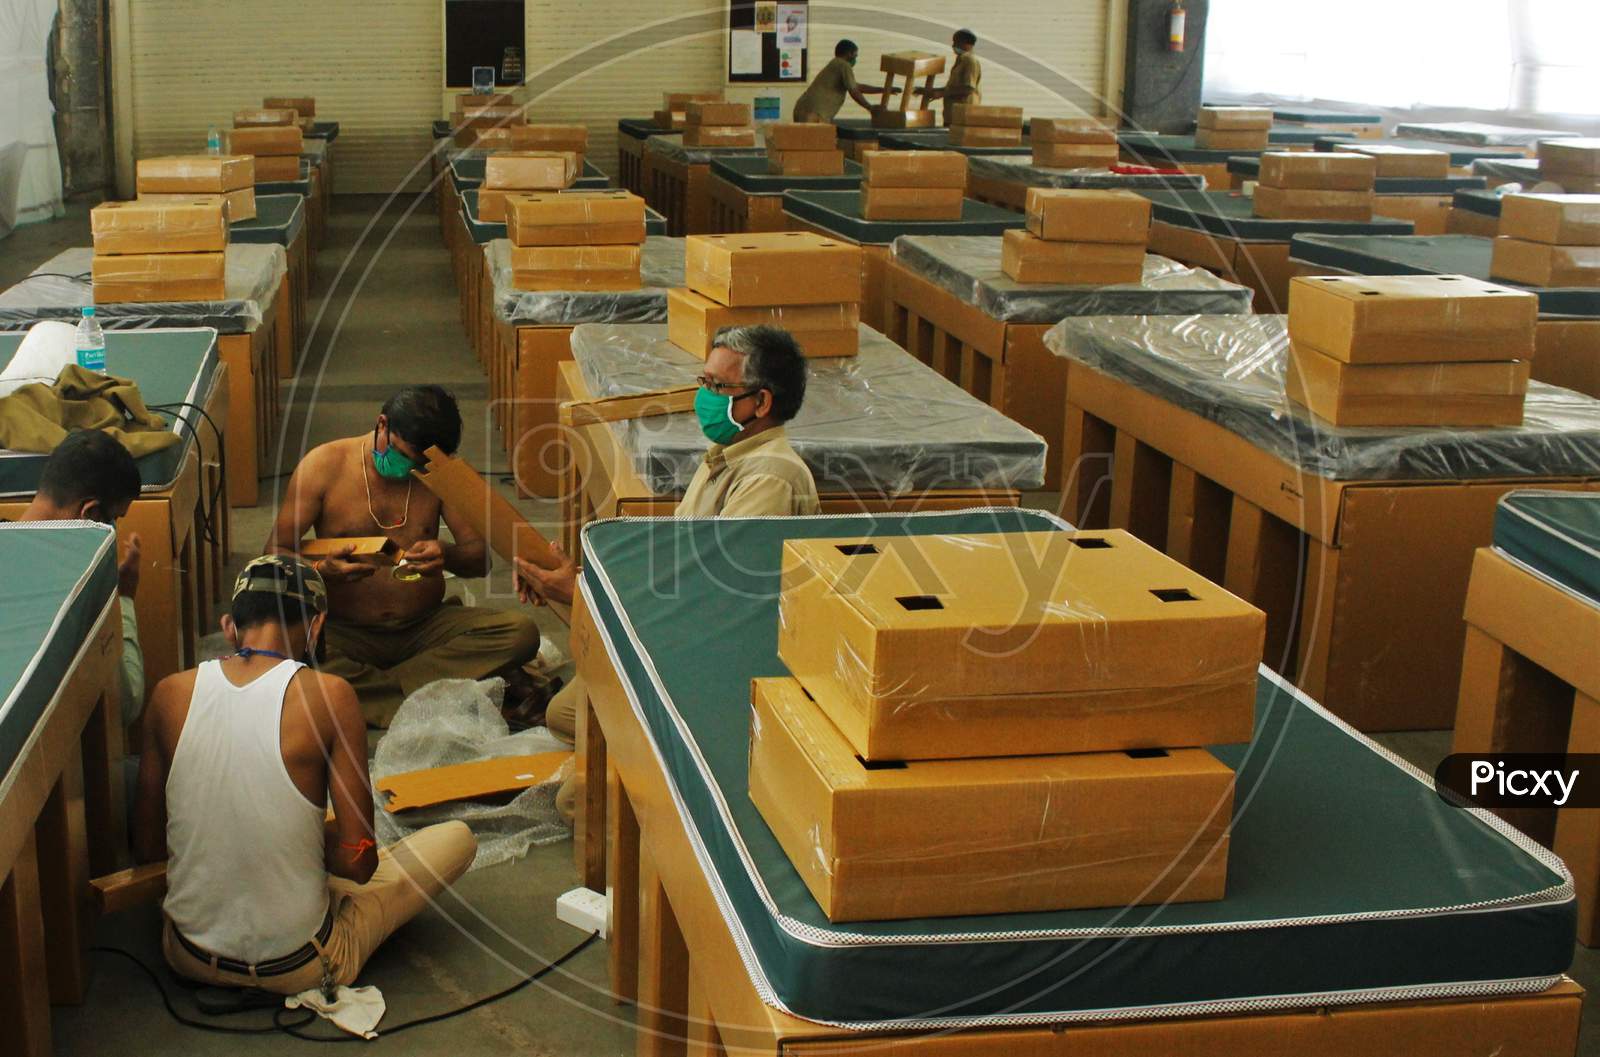 Bombay Municipal Corporation(BMC) workers prepare beds at the iconic St. Xavier's College which has been converted into a quarantine facility for COVID19 patients during an extended lockdown, to slow the spreading of coronavirus disease , in Mumbai, India on May 27, 2020.